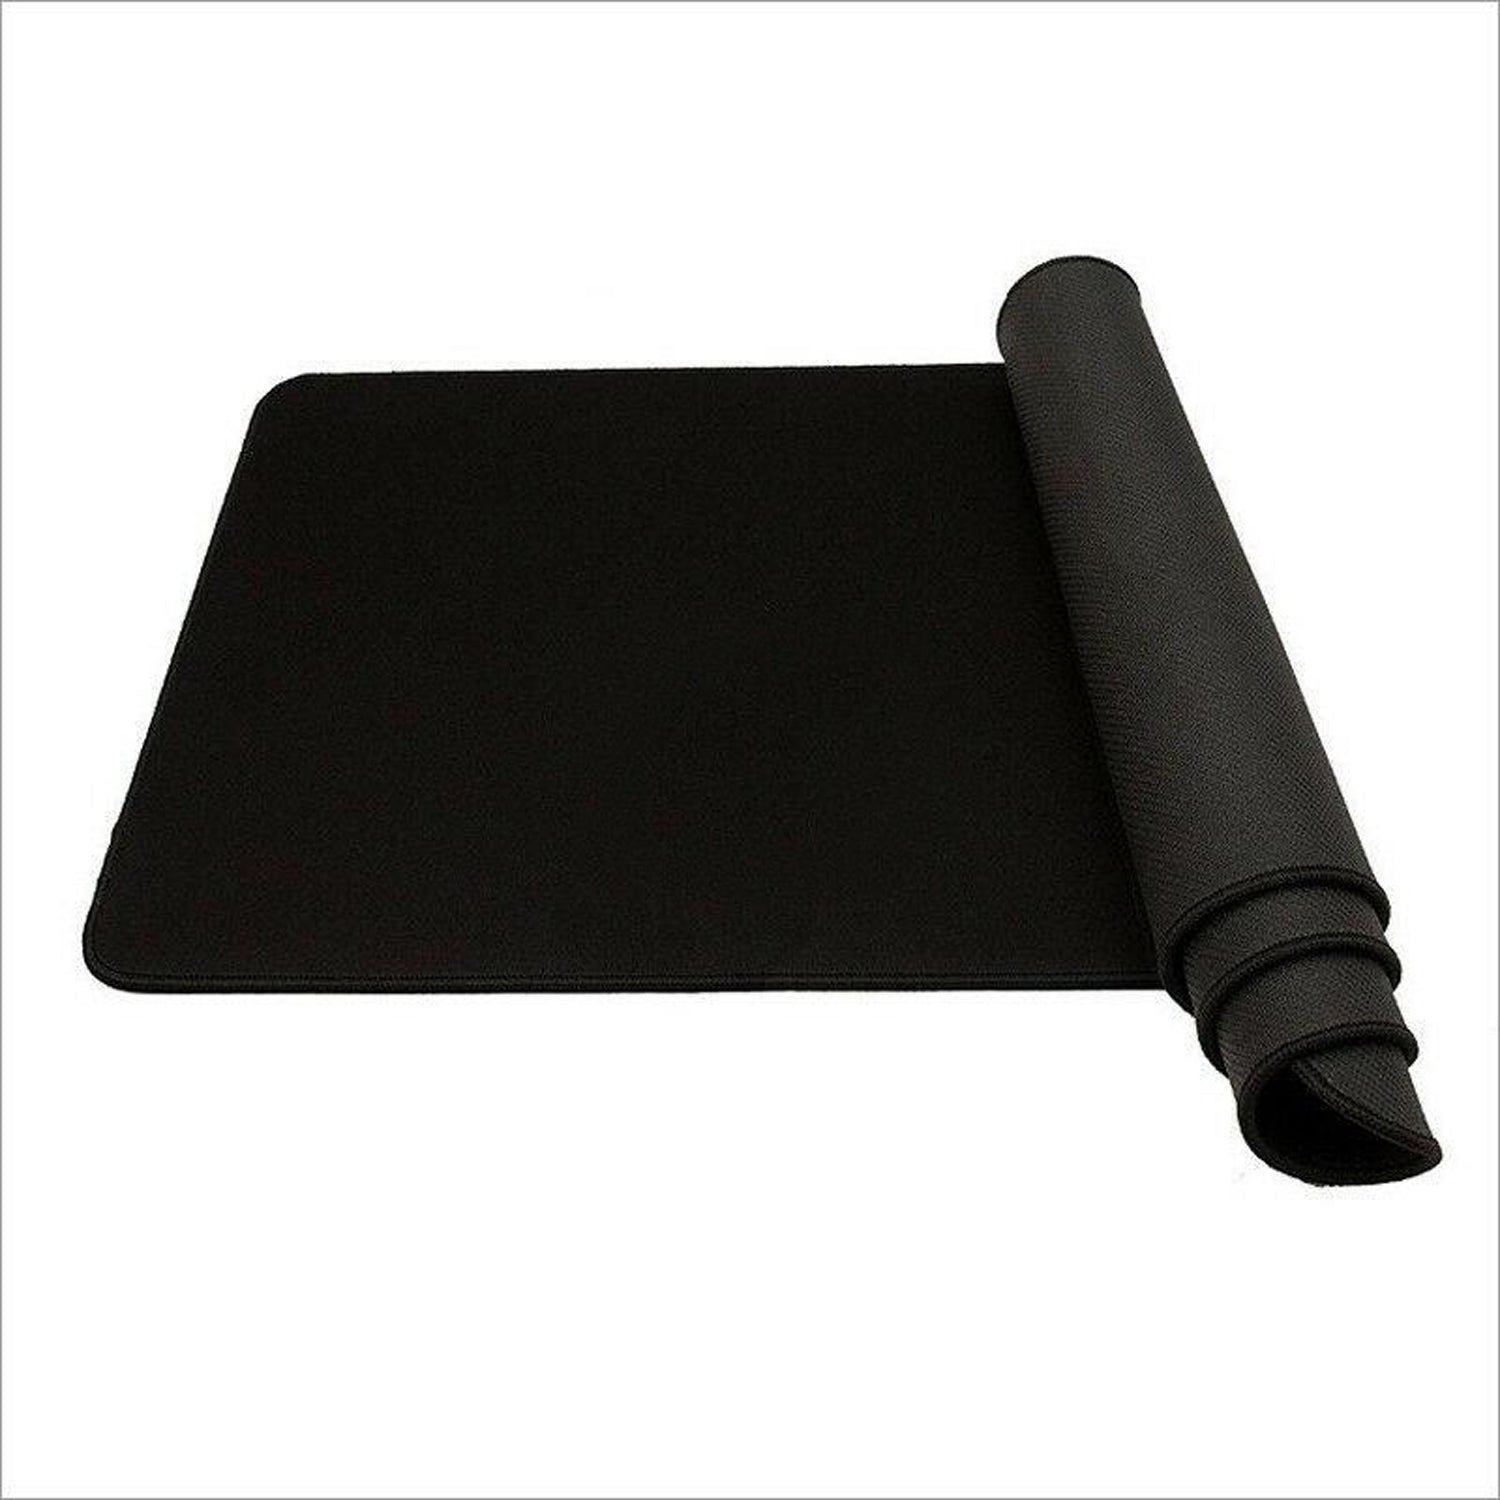 Desktop Gaming Large Extended Anti Slip Rubber Mouse Pad -800x300x3mm